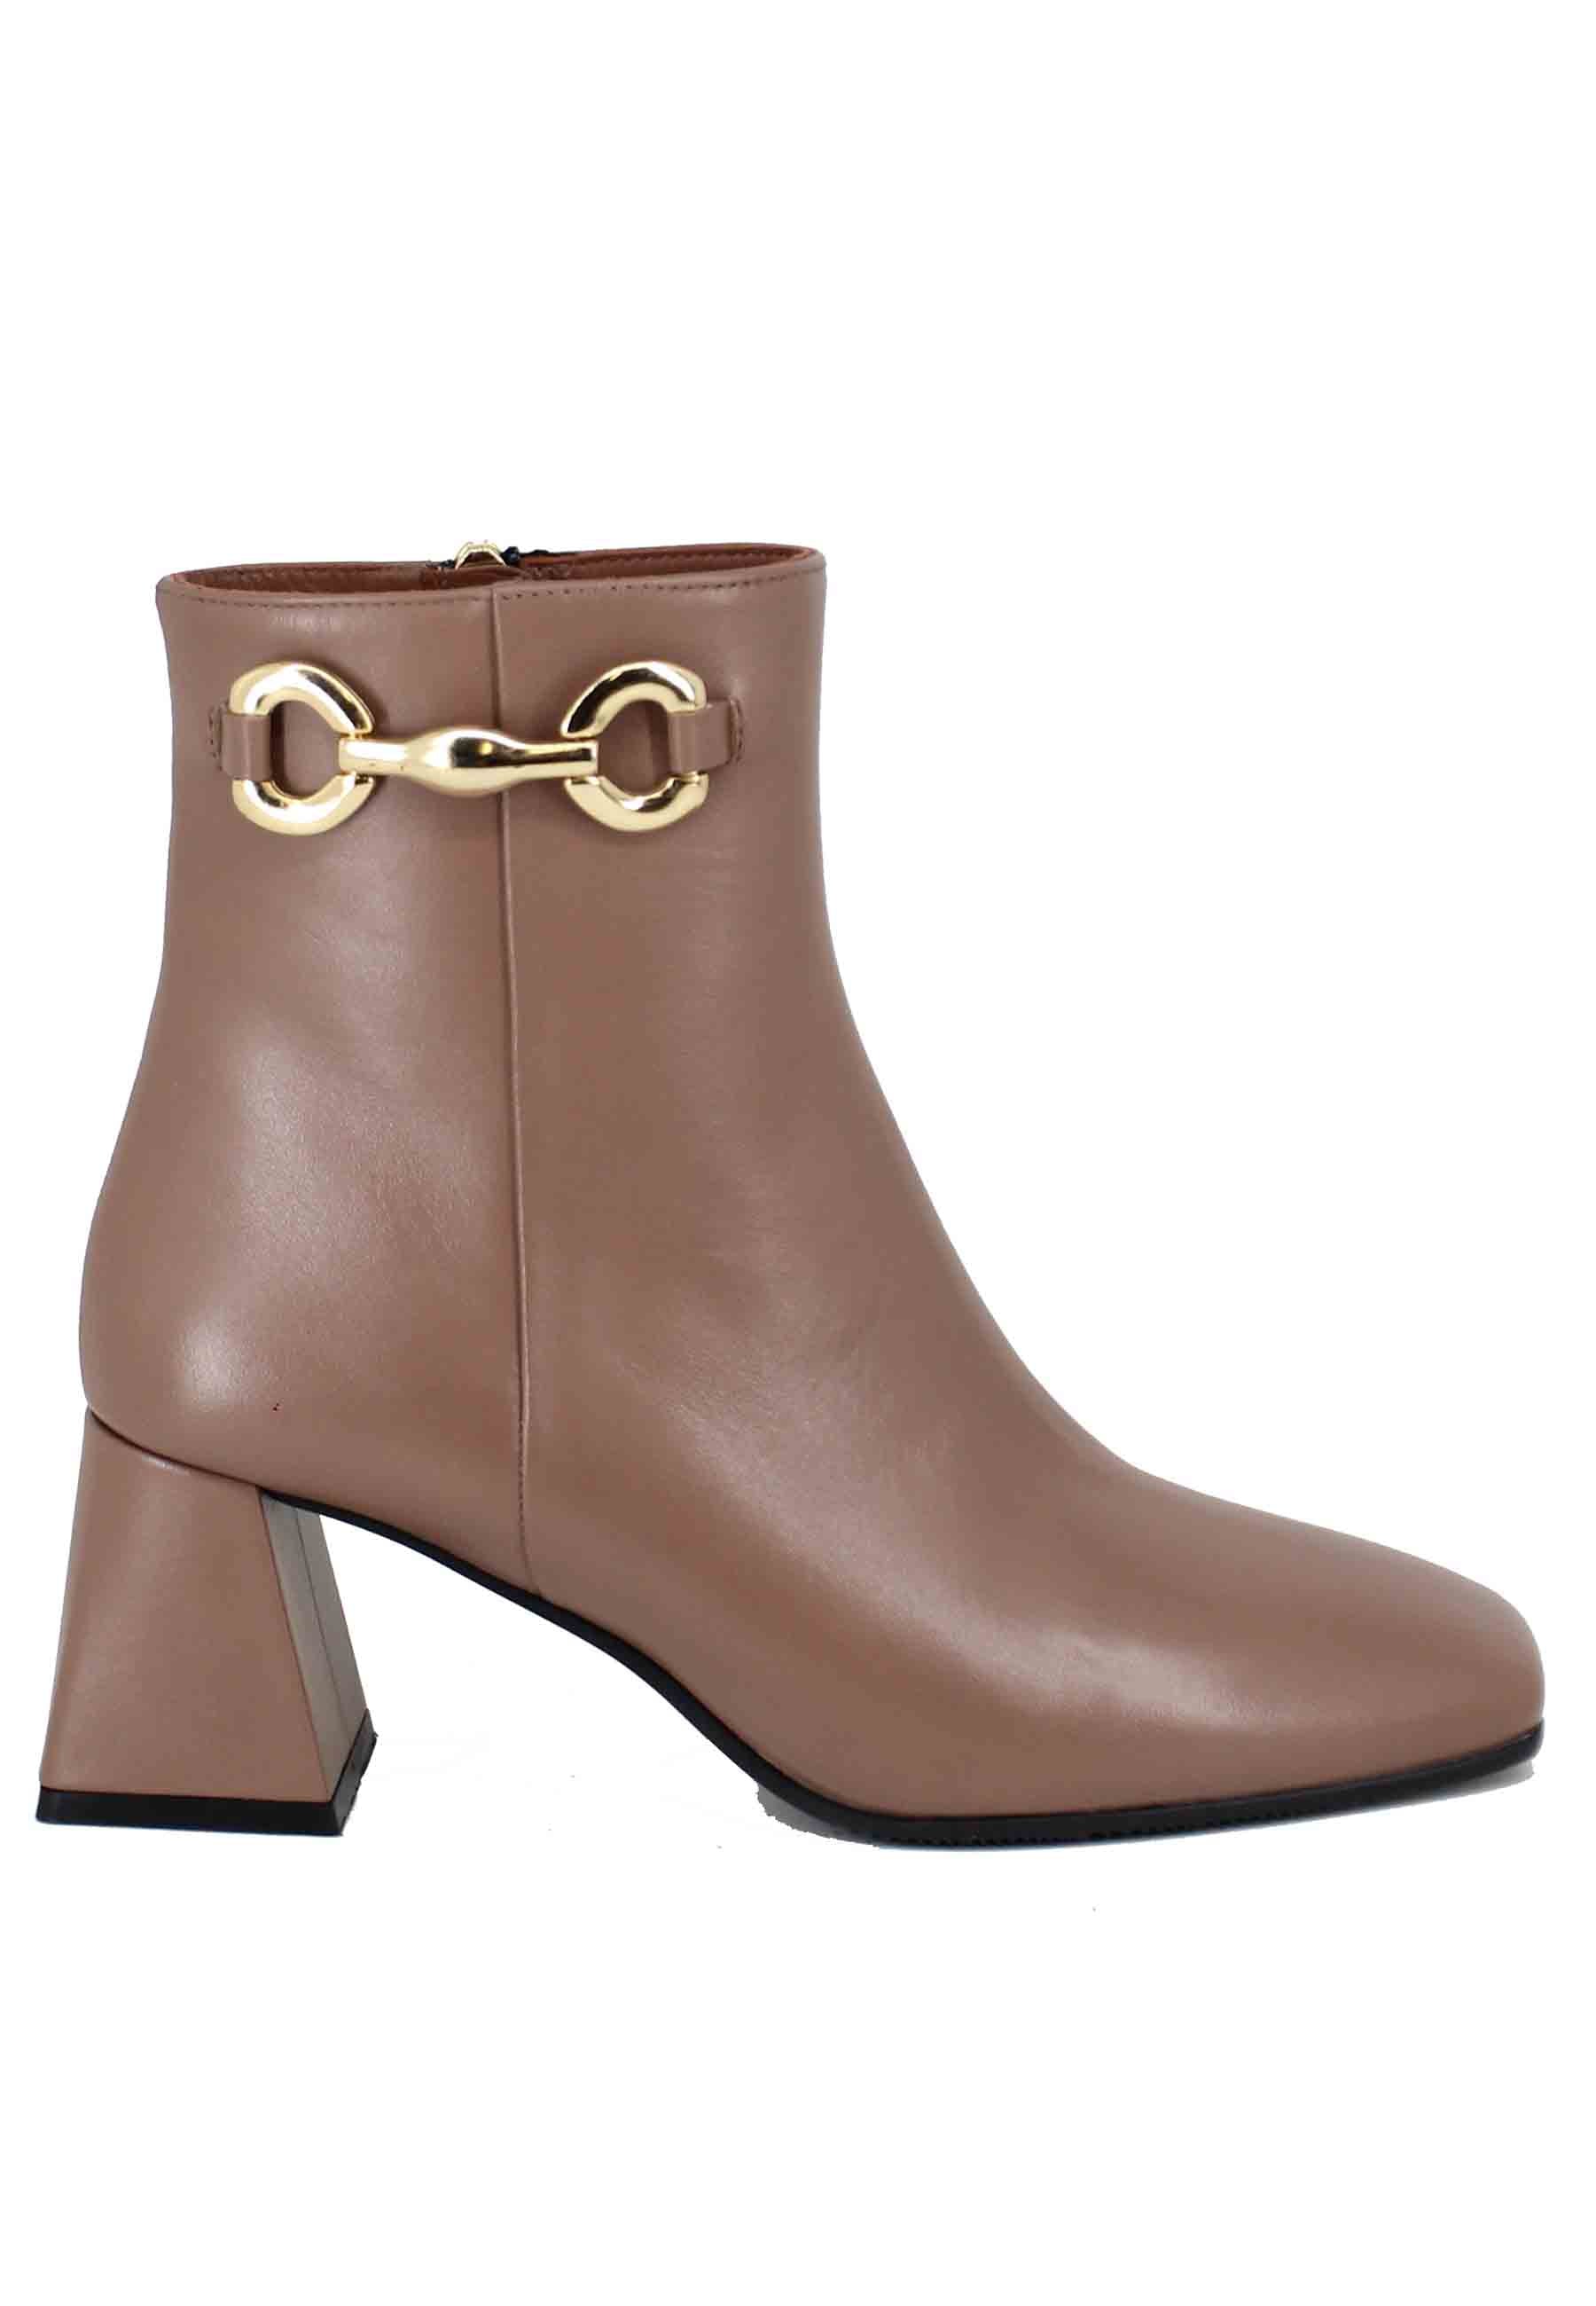 Women's taupe leather ankle boots with gold clamp